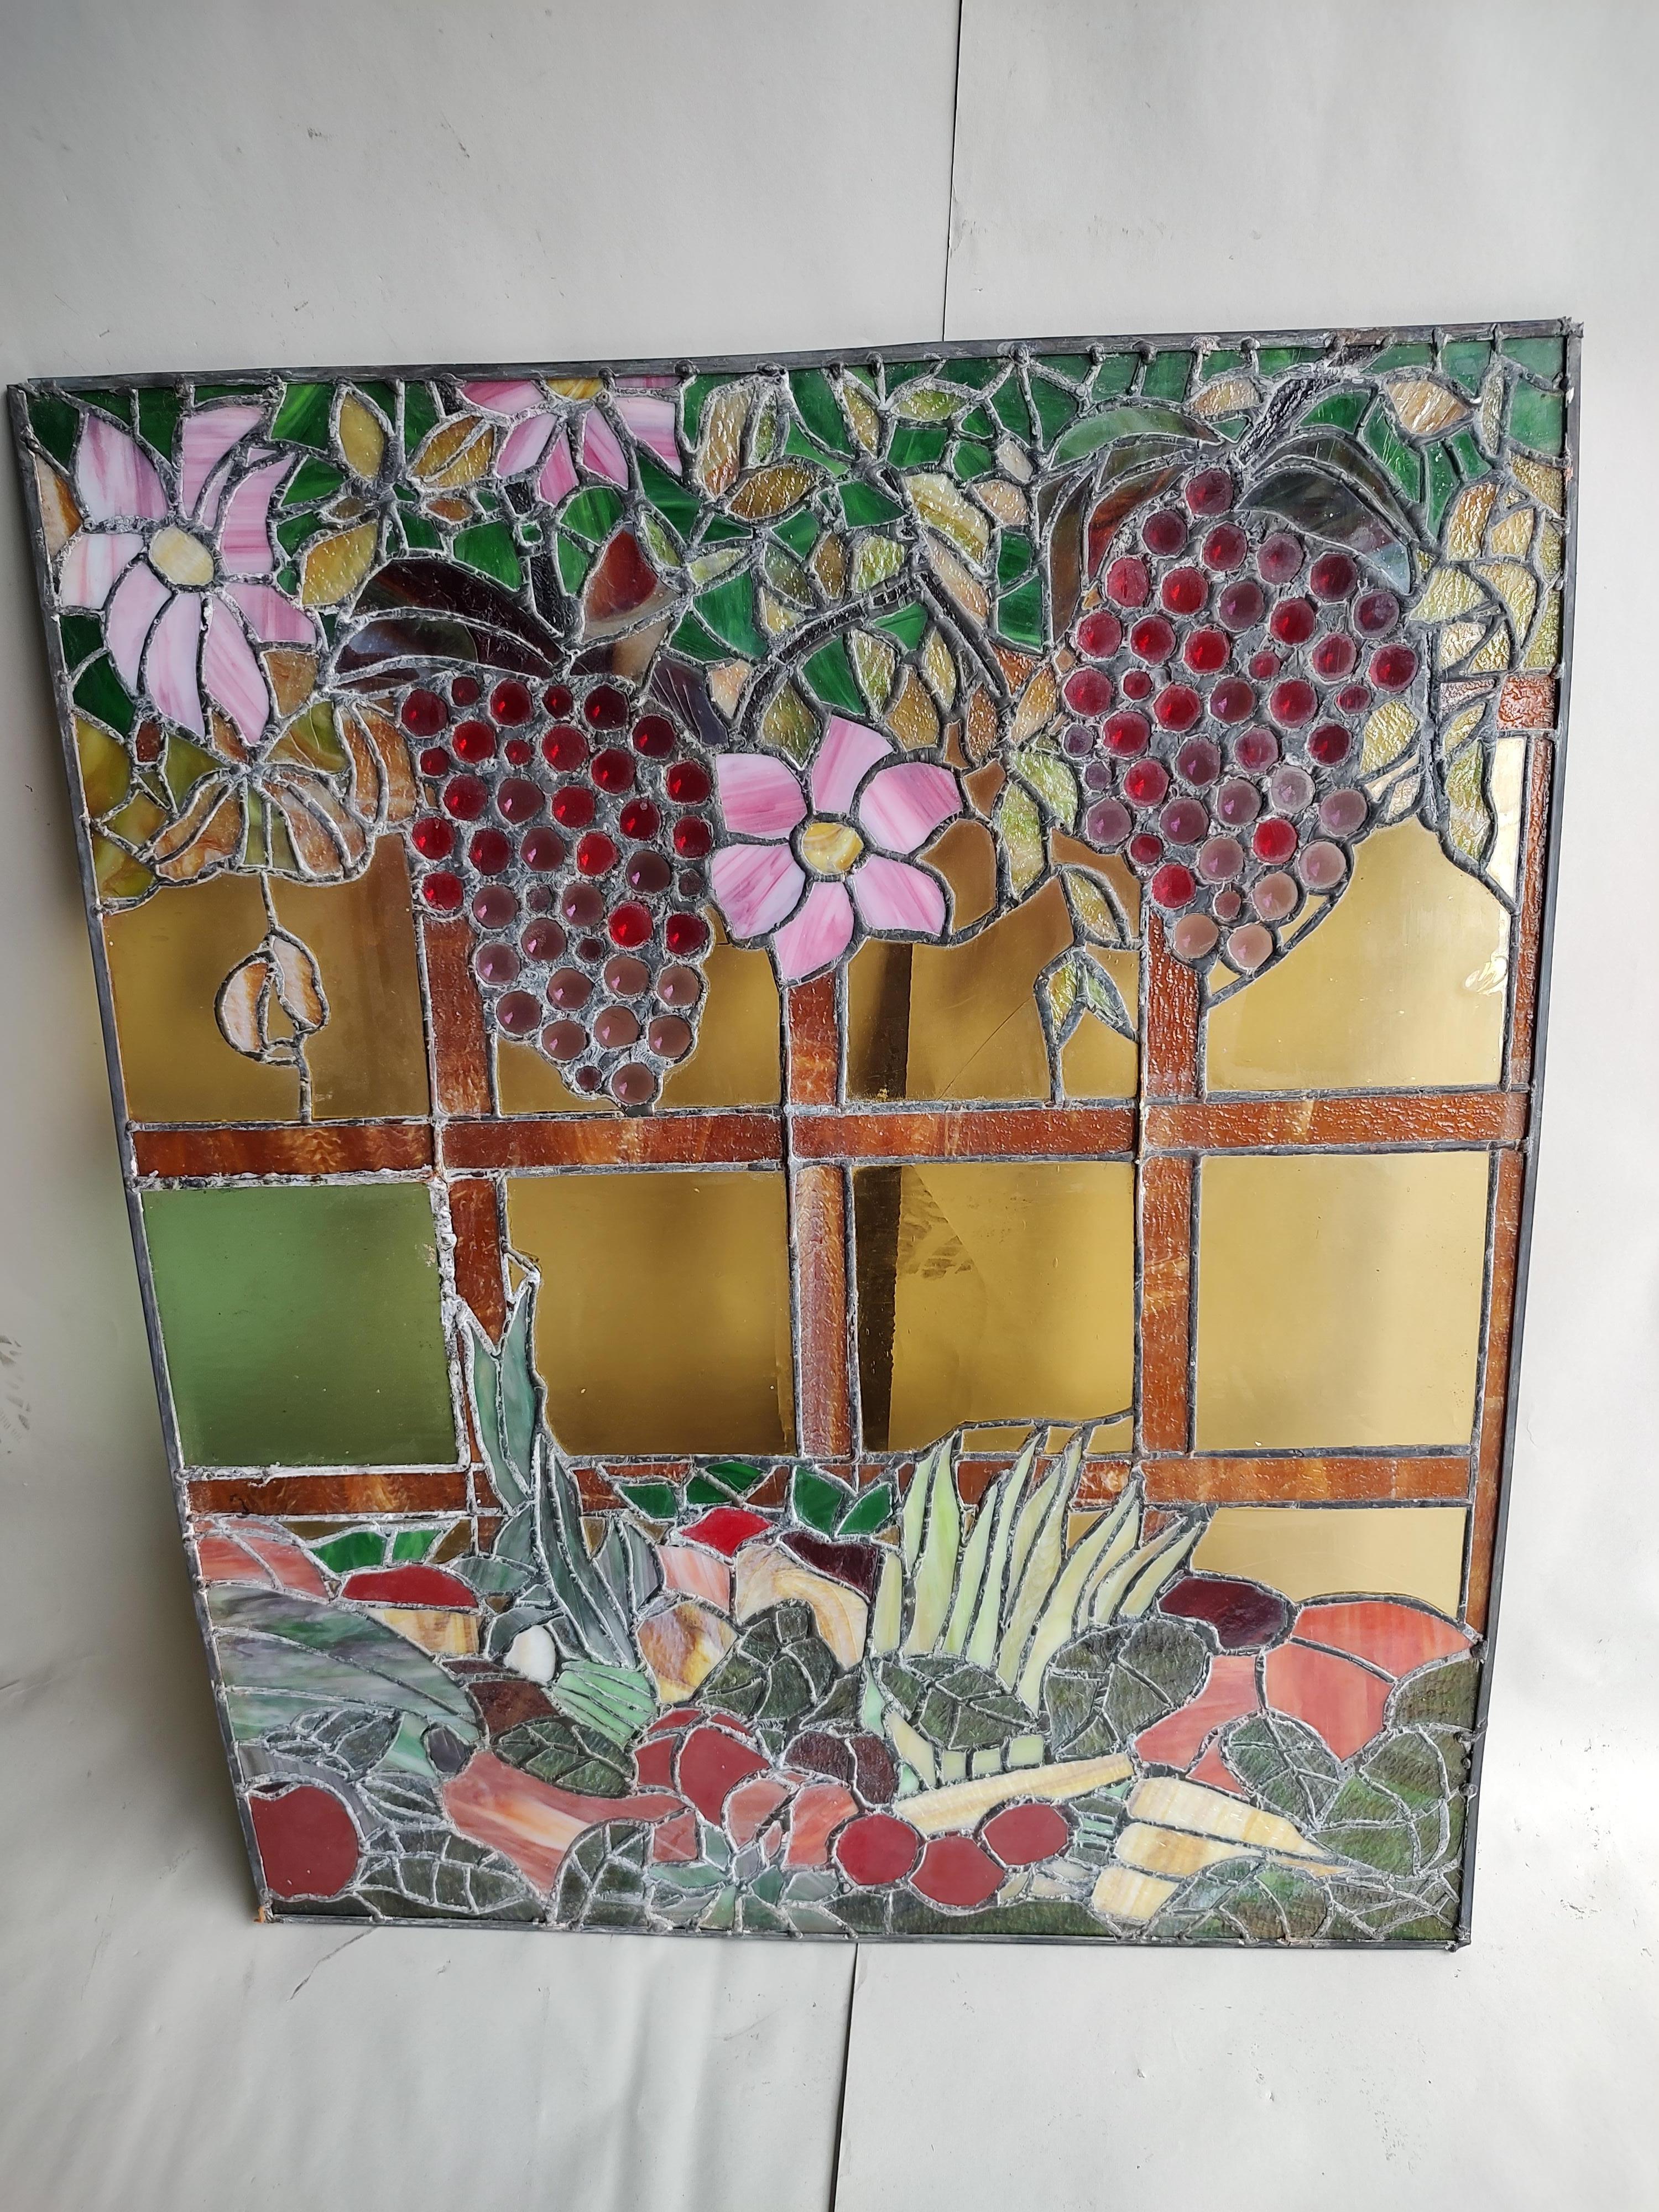 Hand-Crafted Midcentury Stained Glass Window Panels by Rainbow Studios NY, circa 1965 #3 For Sale